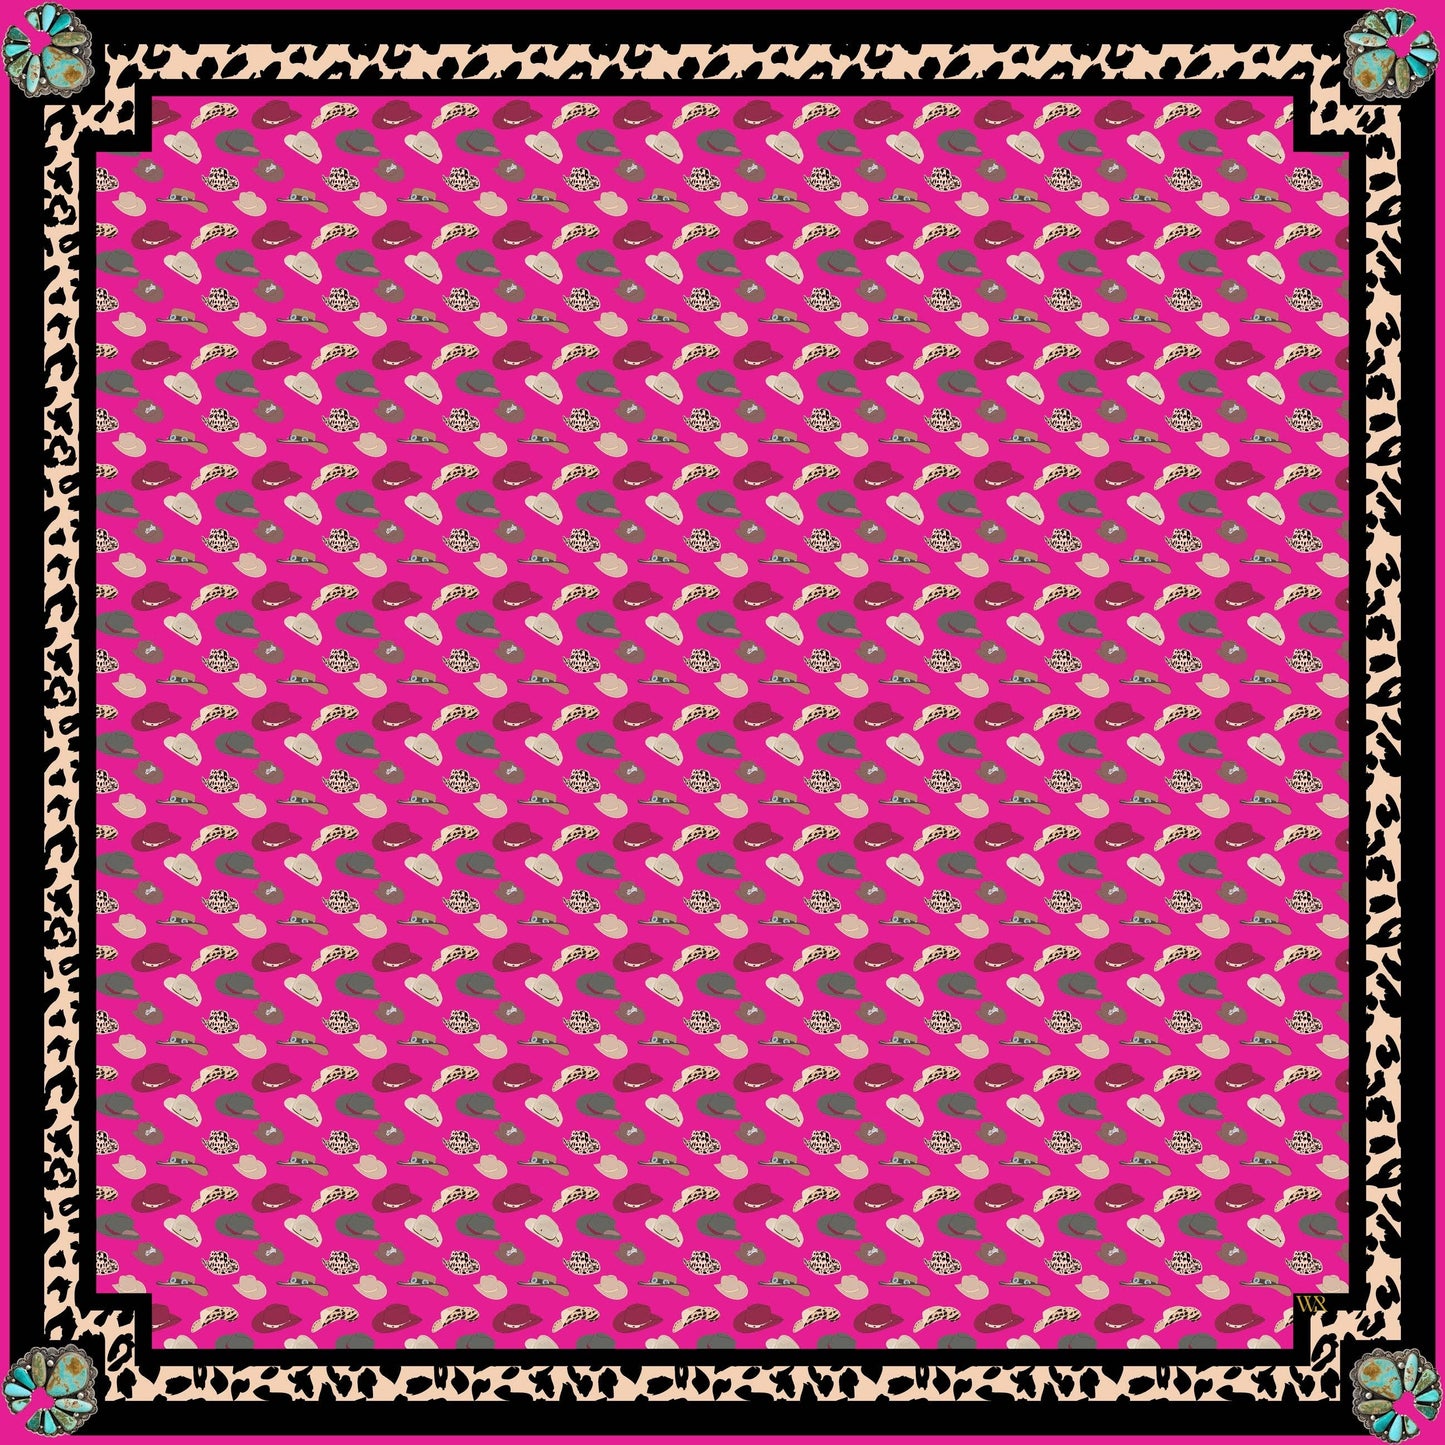 Whipin Wild Rags - Hot Pink NFR Scarf